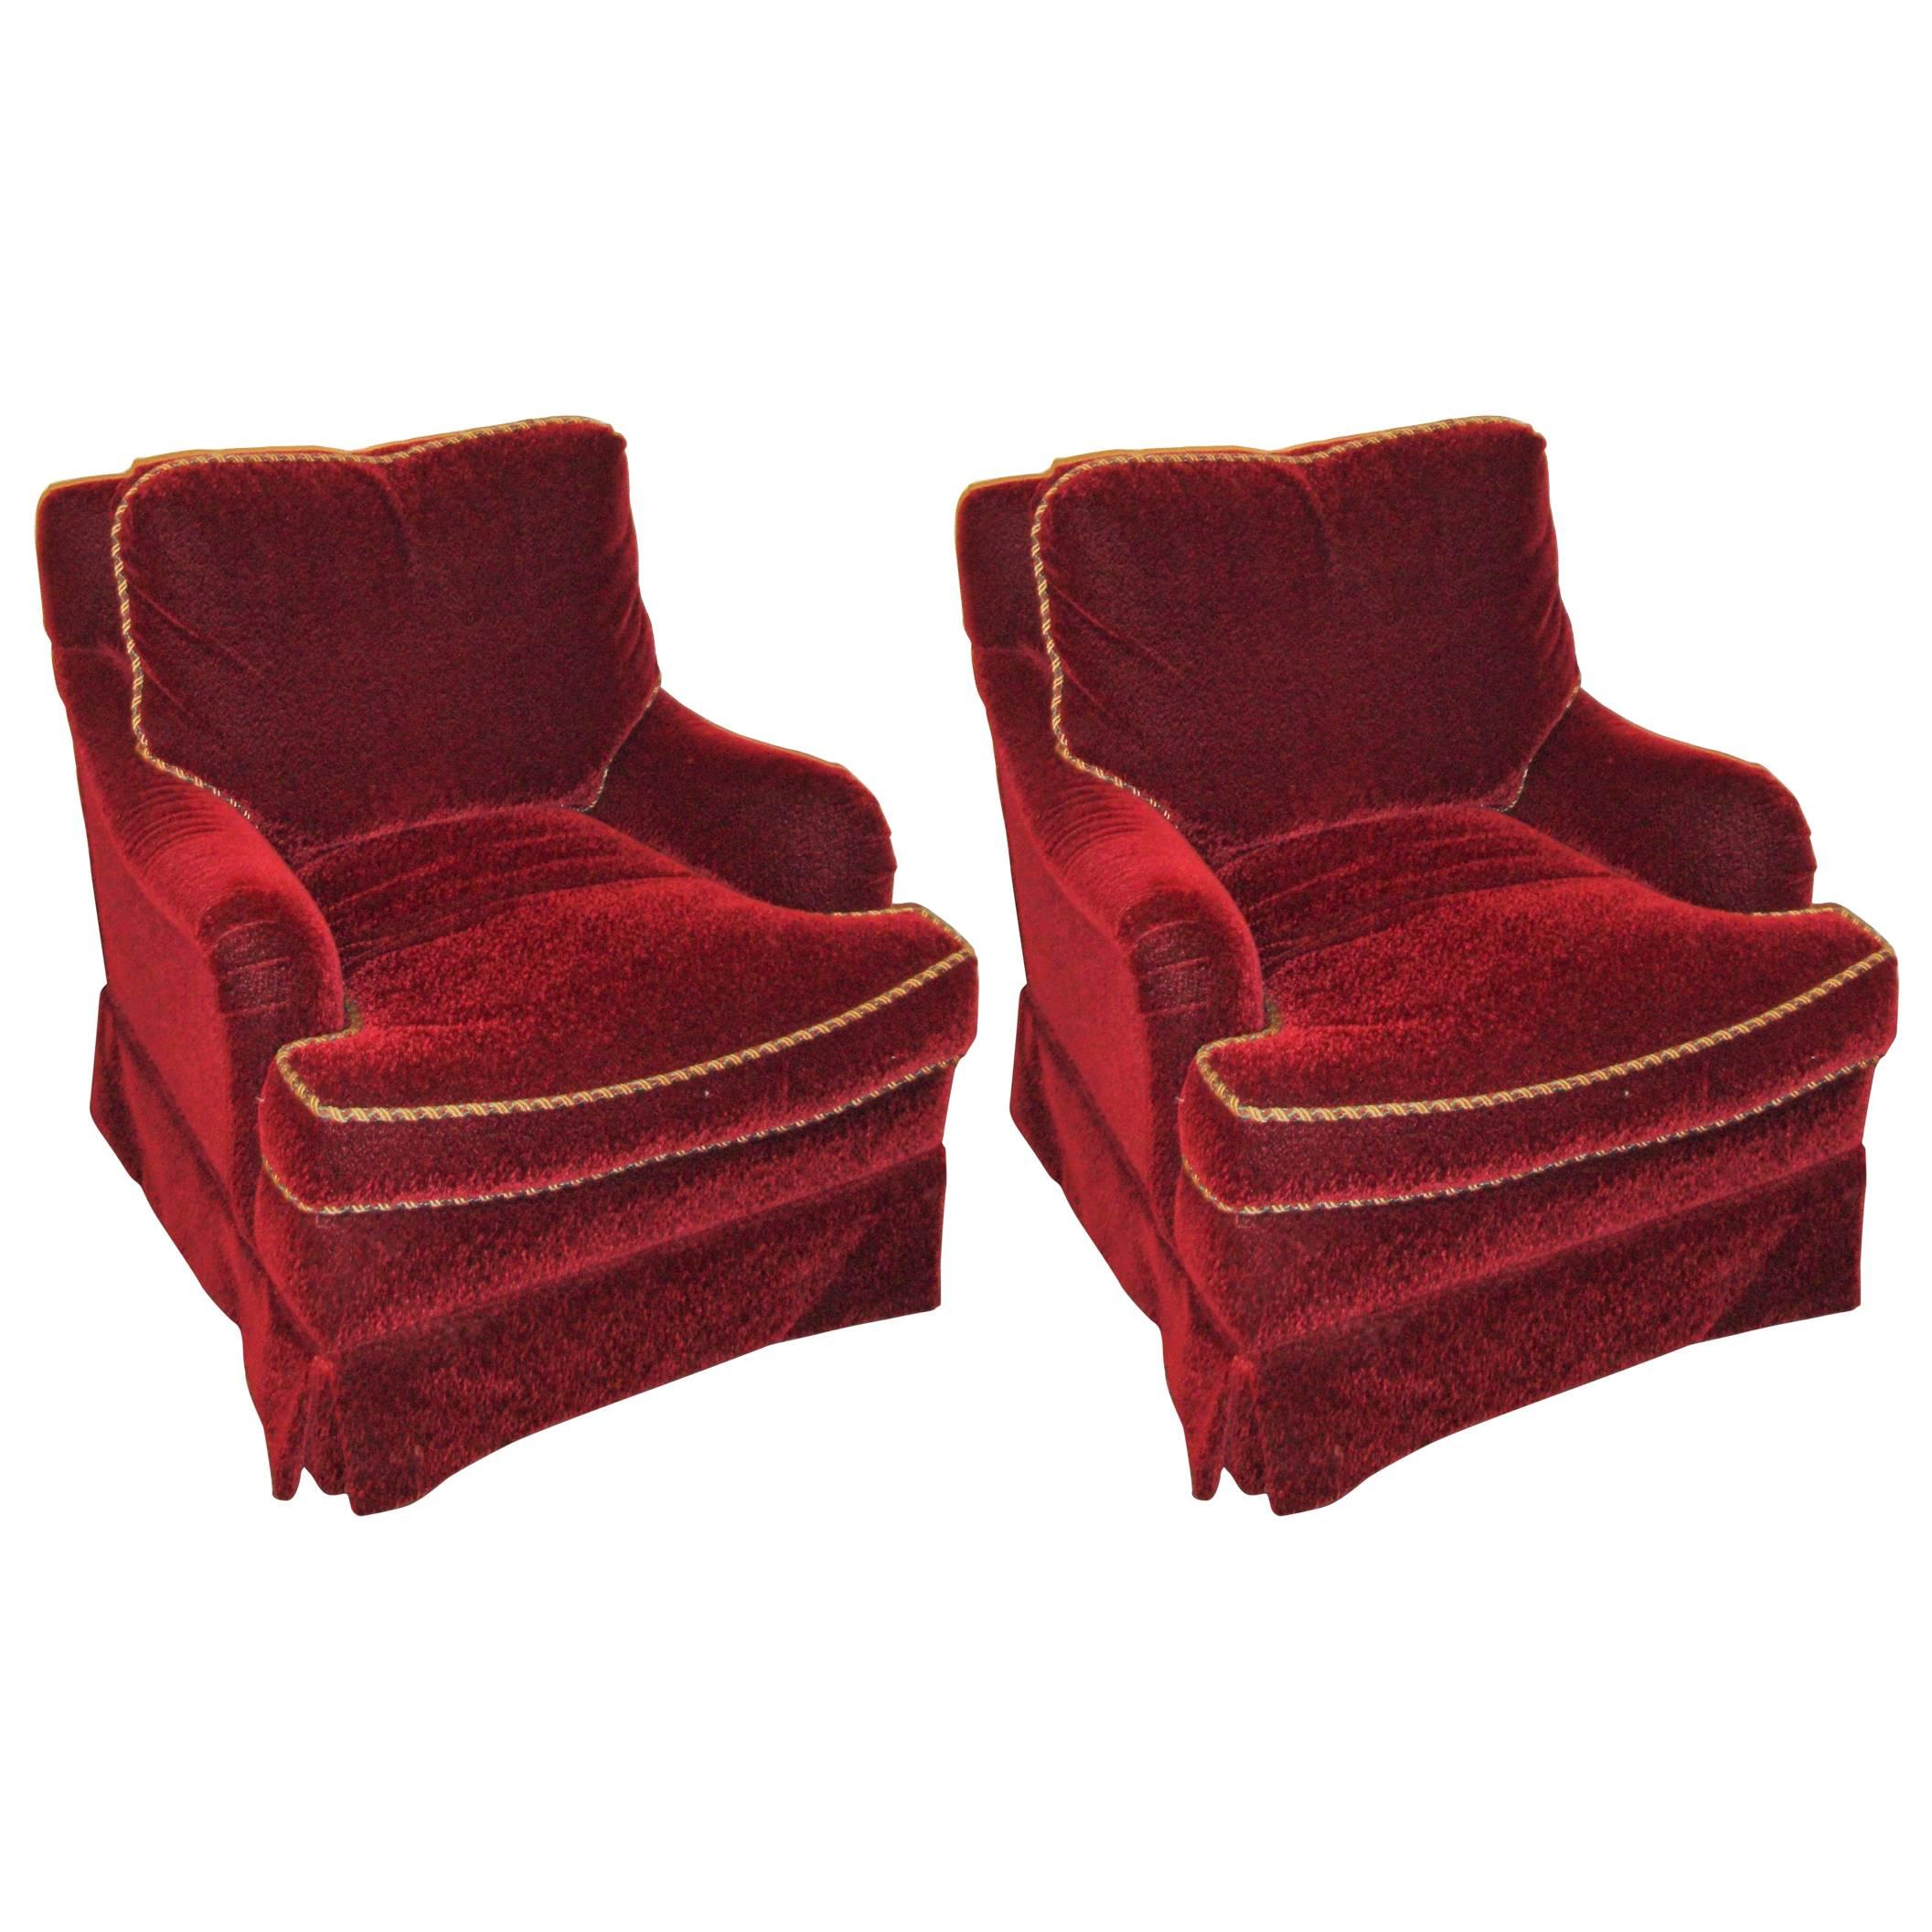 Pair of Edward Ferrell Swivel Chairs Fine Upholstered Custom Mohair Lined Fabric